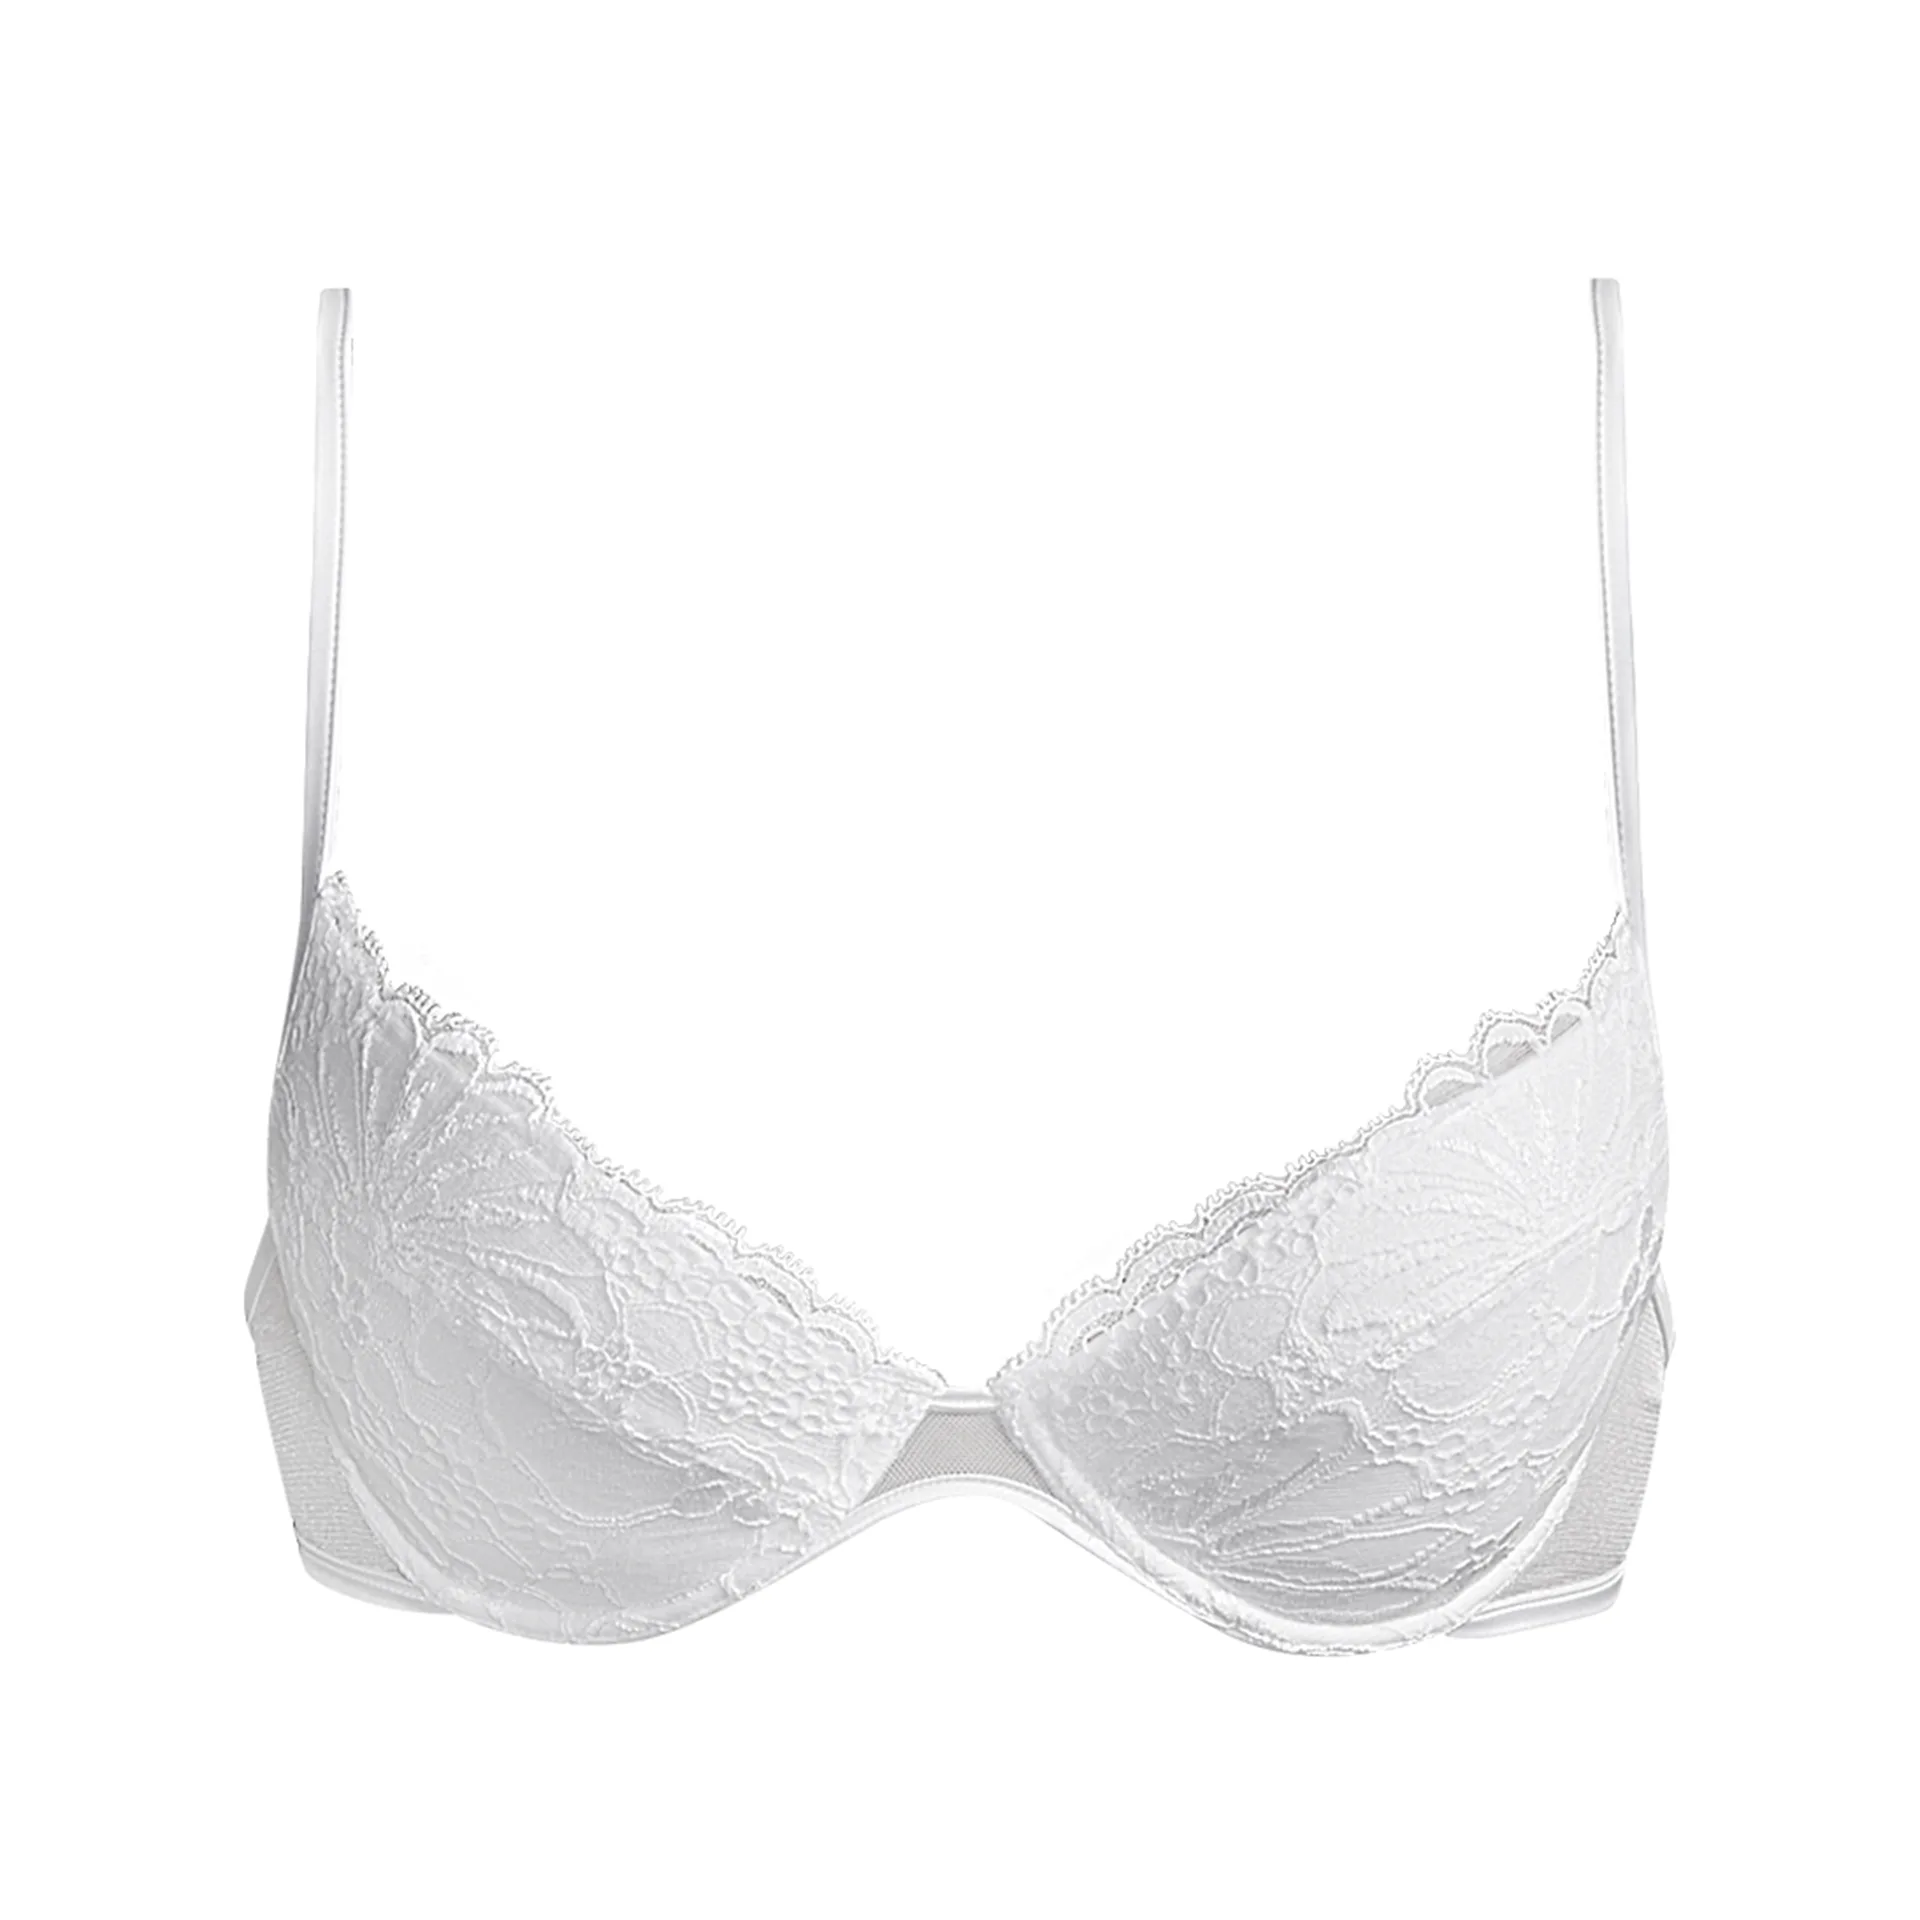 Andres Sarda TYNG white push-up bra removable pads